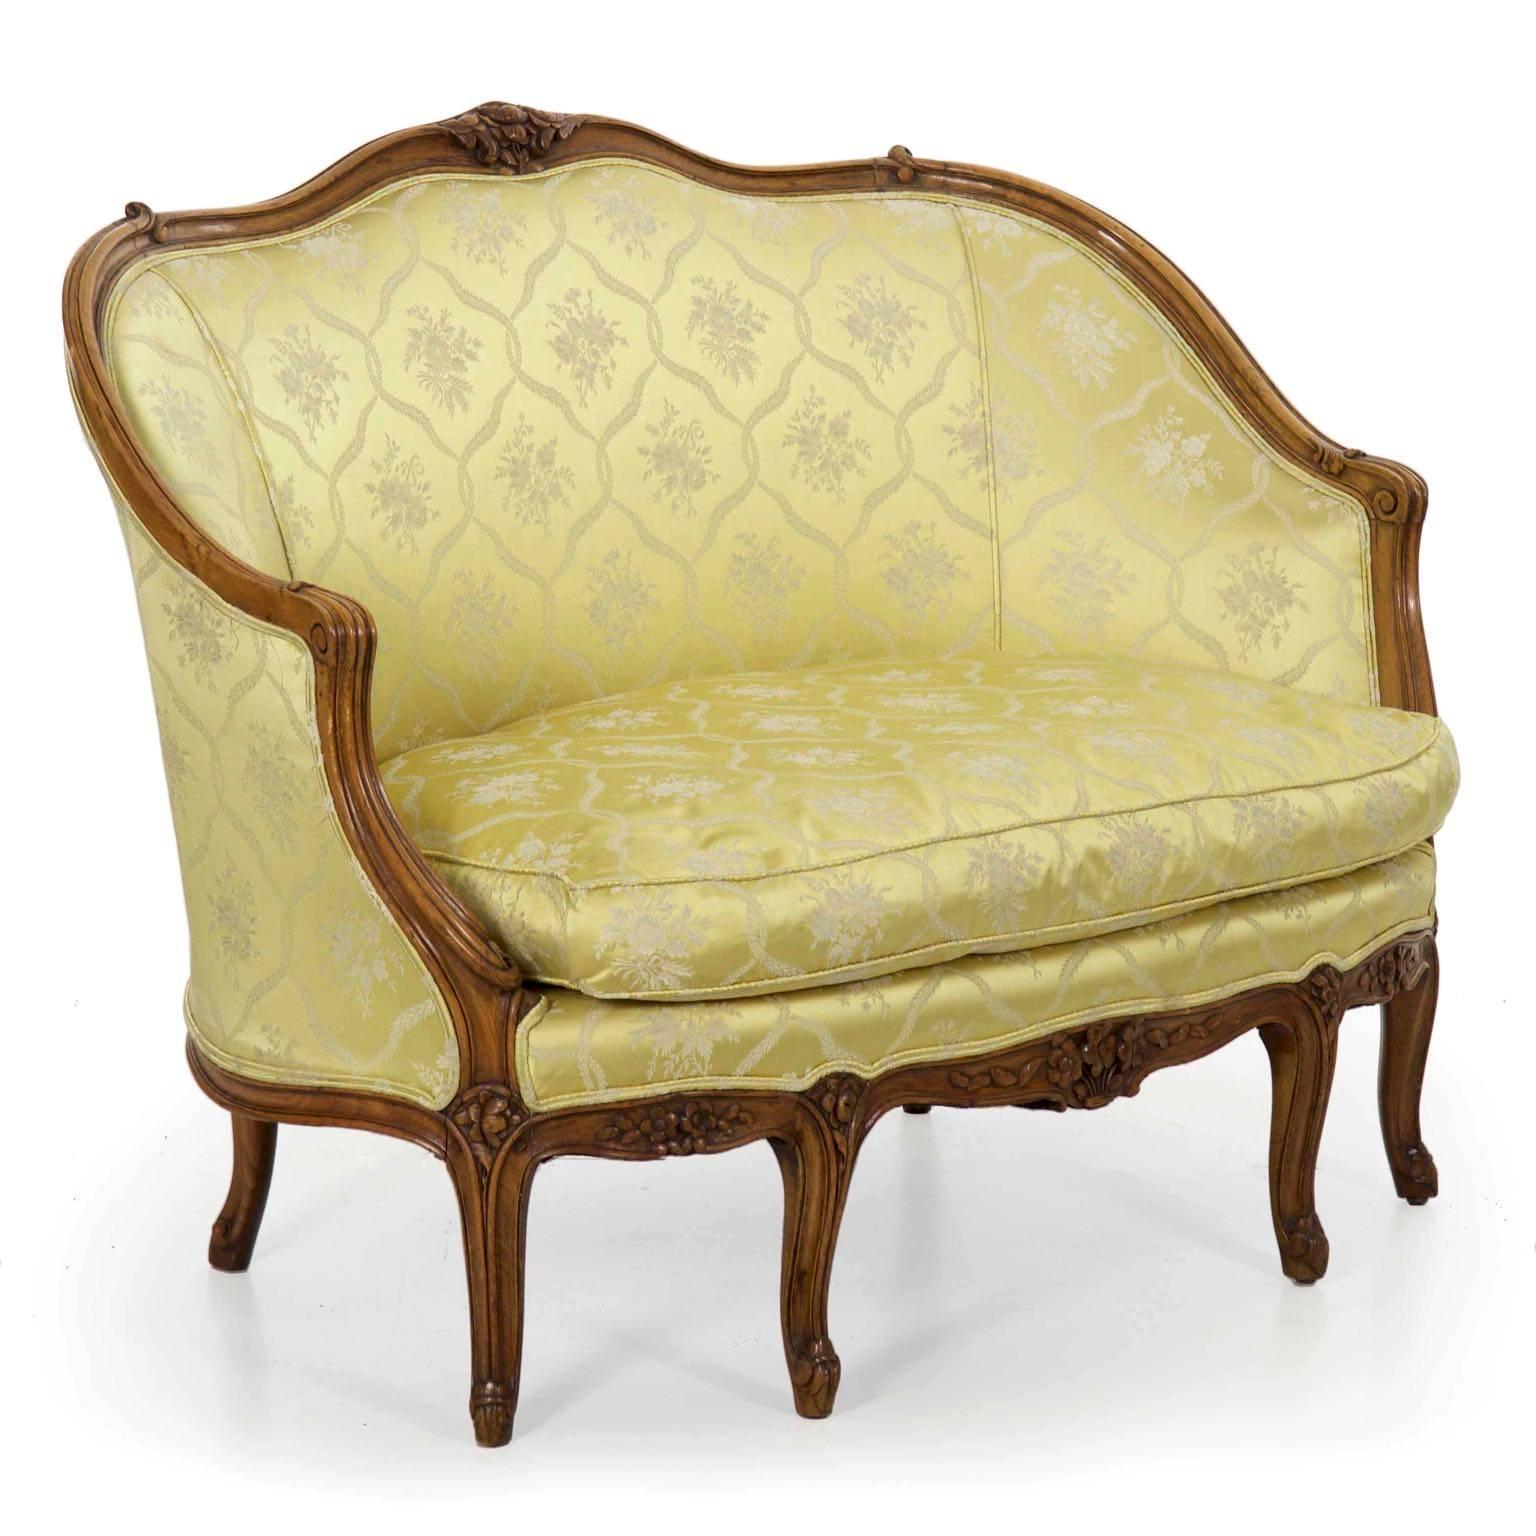 We love this gorgeous little antique French canapé sofa with its slight proportions and relentless curvatures. It moves beyond the typical carvings of the era and introduces nearly unique carved motifs in the feet, transforming the typically